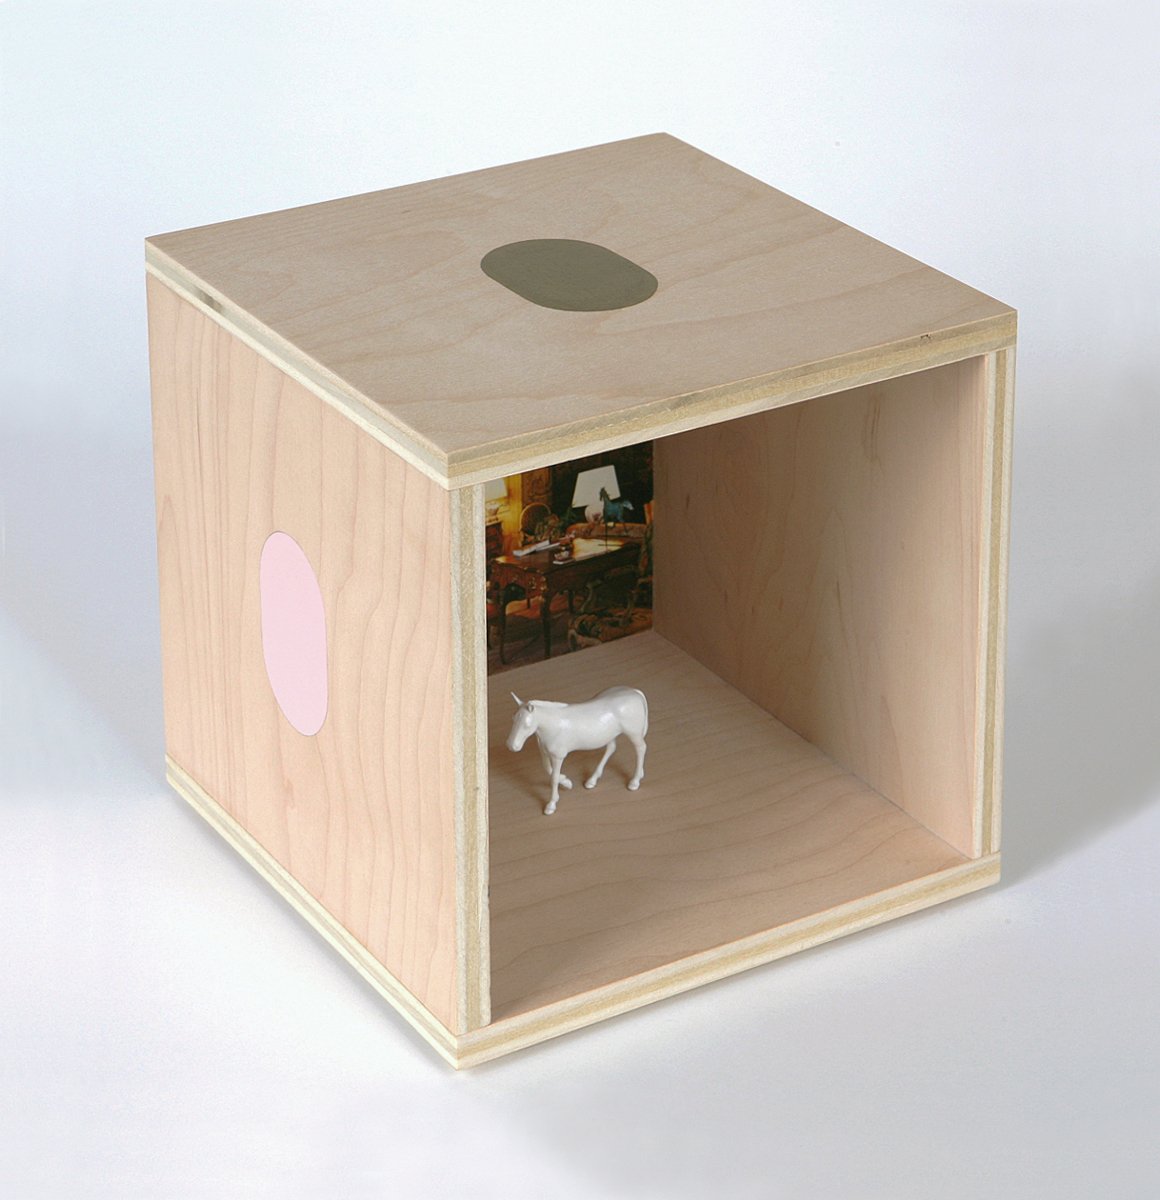 A plywood cube with ovals on the outside and a small white mule model inside.